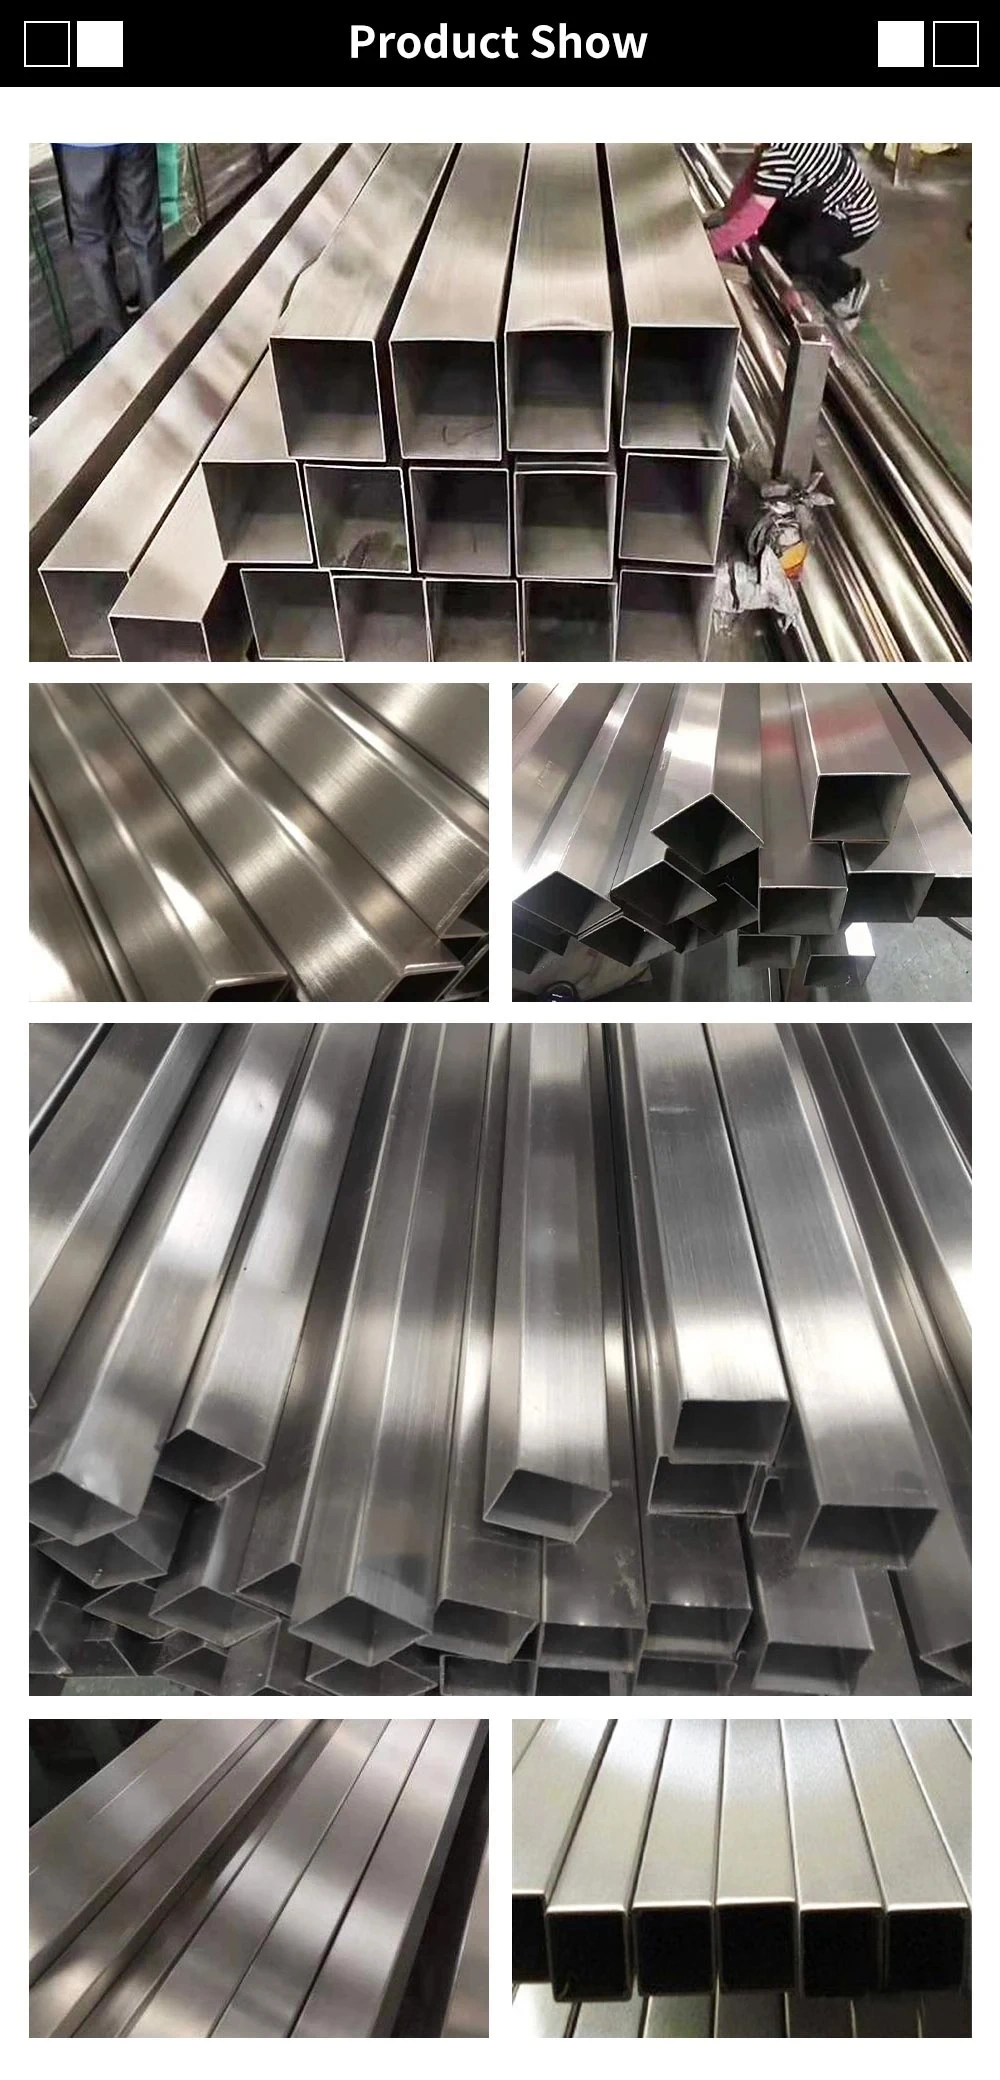 China Supplier Provide Top Quality Best Price Cold Rolled Standard 201, 202, 304, 316, 430 Stainless Steel Square Pipe